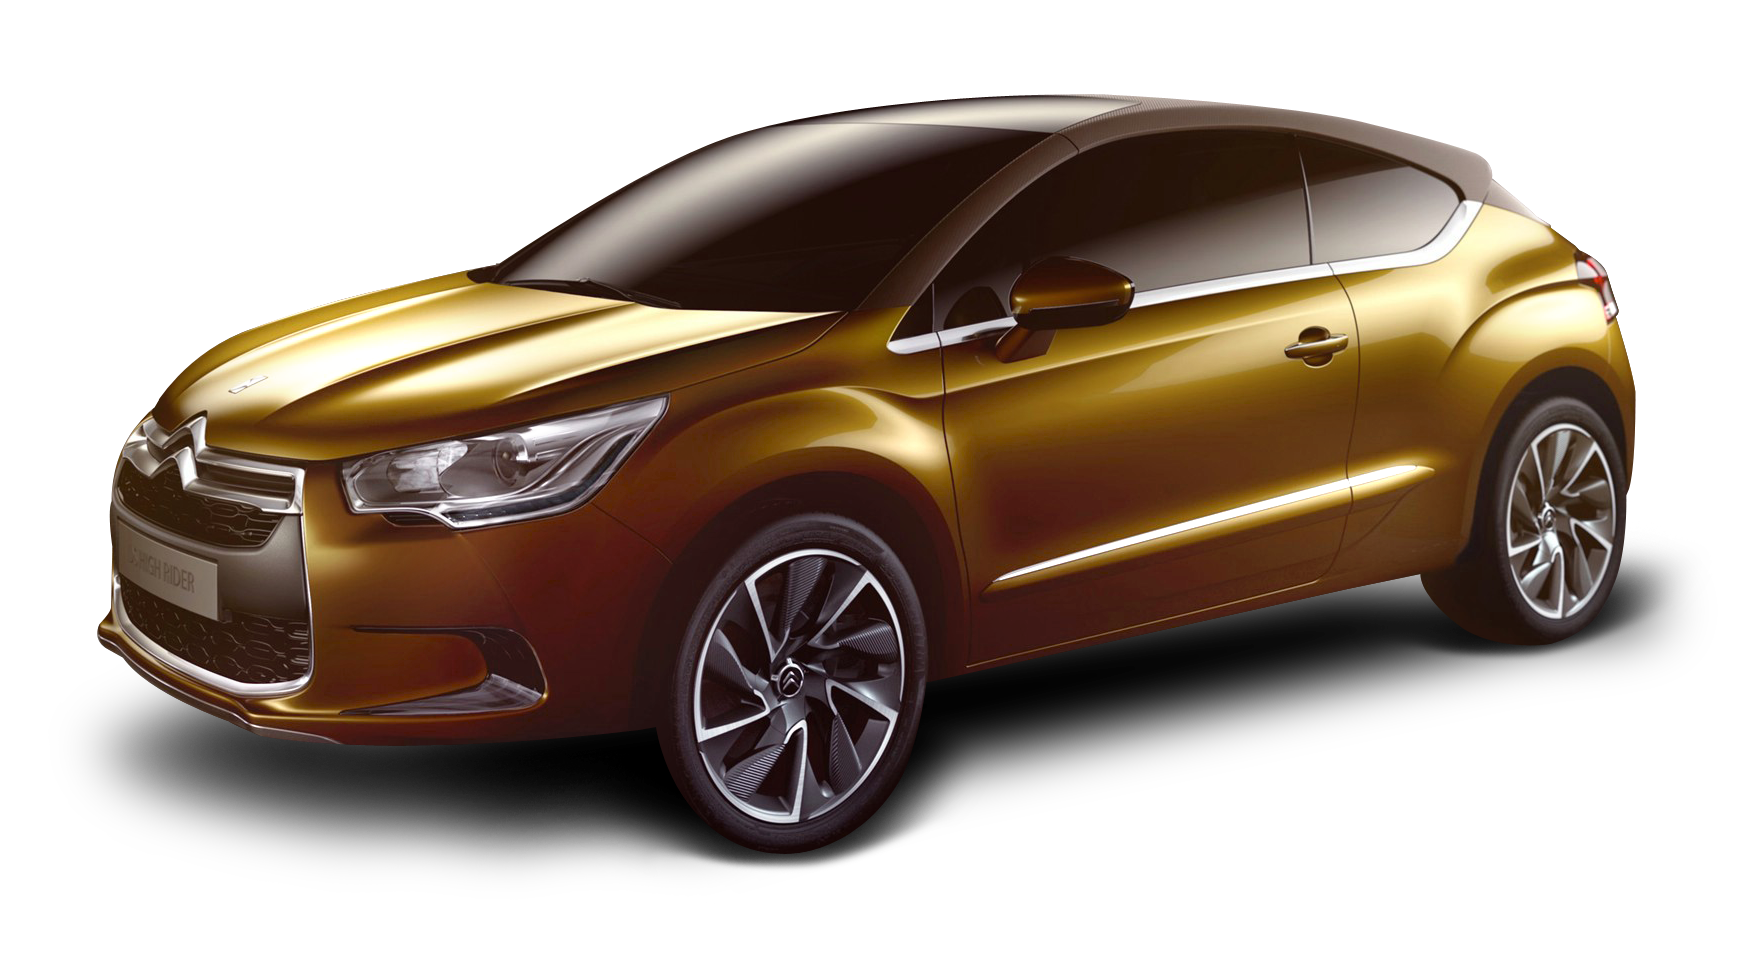 A Gold Car With Black Background